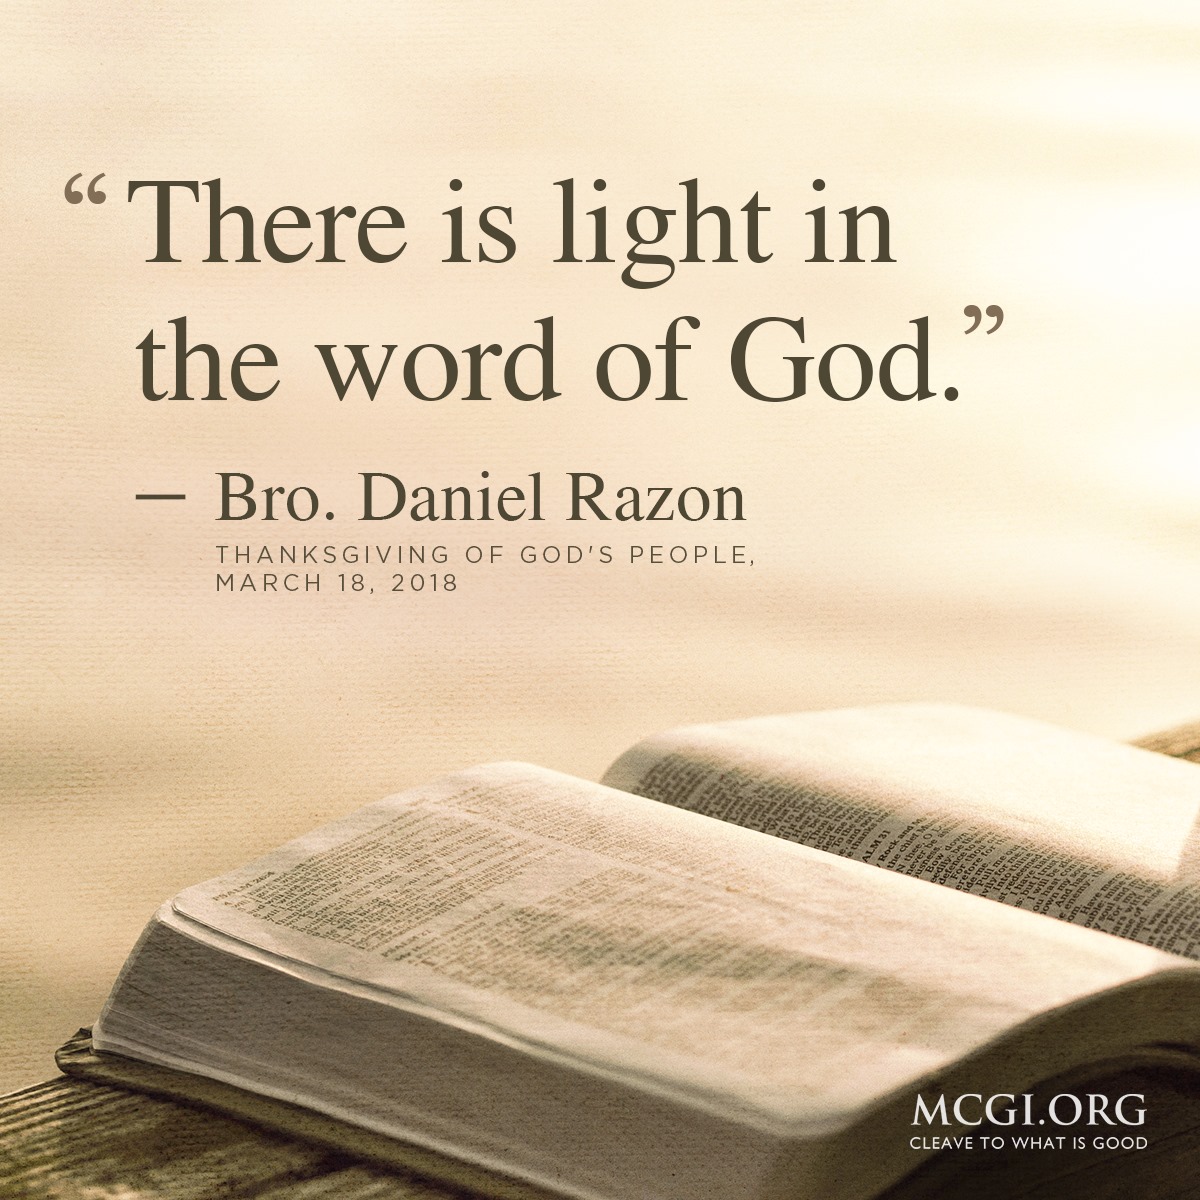 'There is light in the word of God.'

— Brother Daniel Razon

The Church Built by God
#PureDoctrinesOfChrist